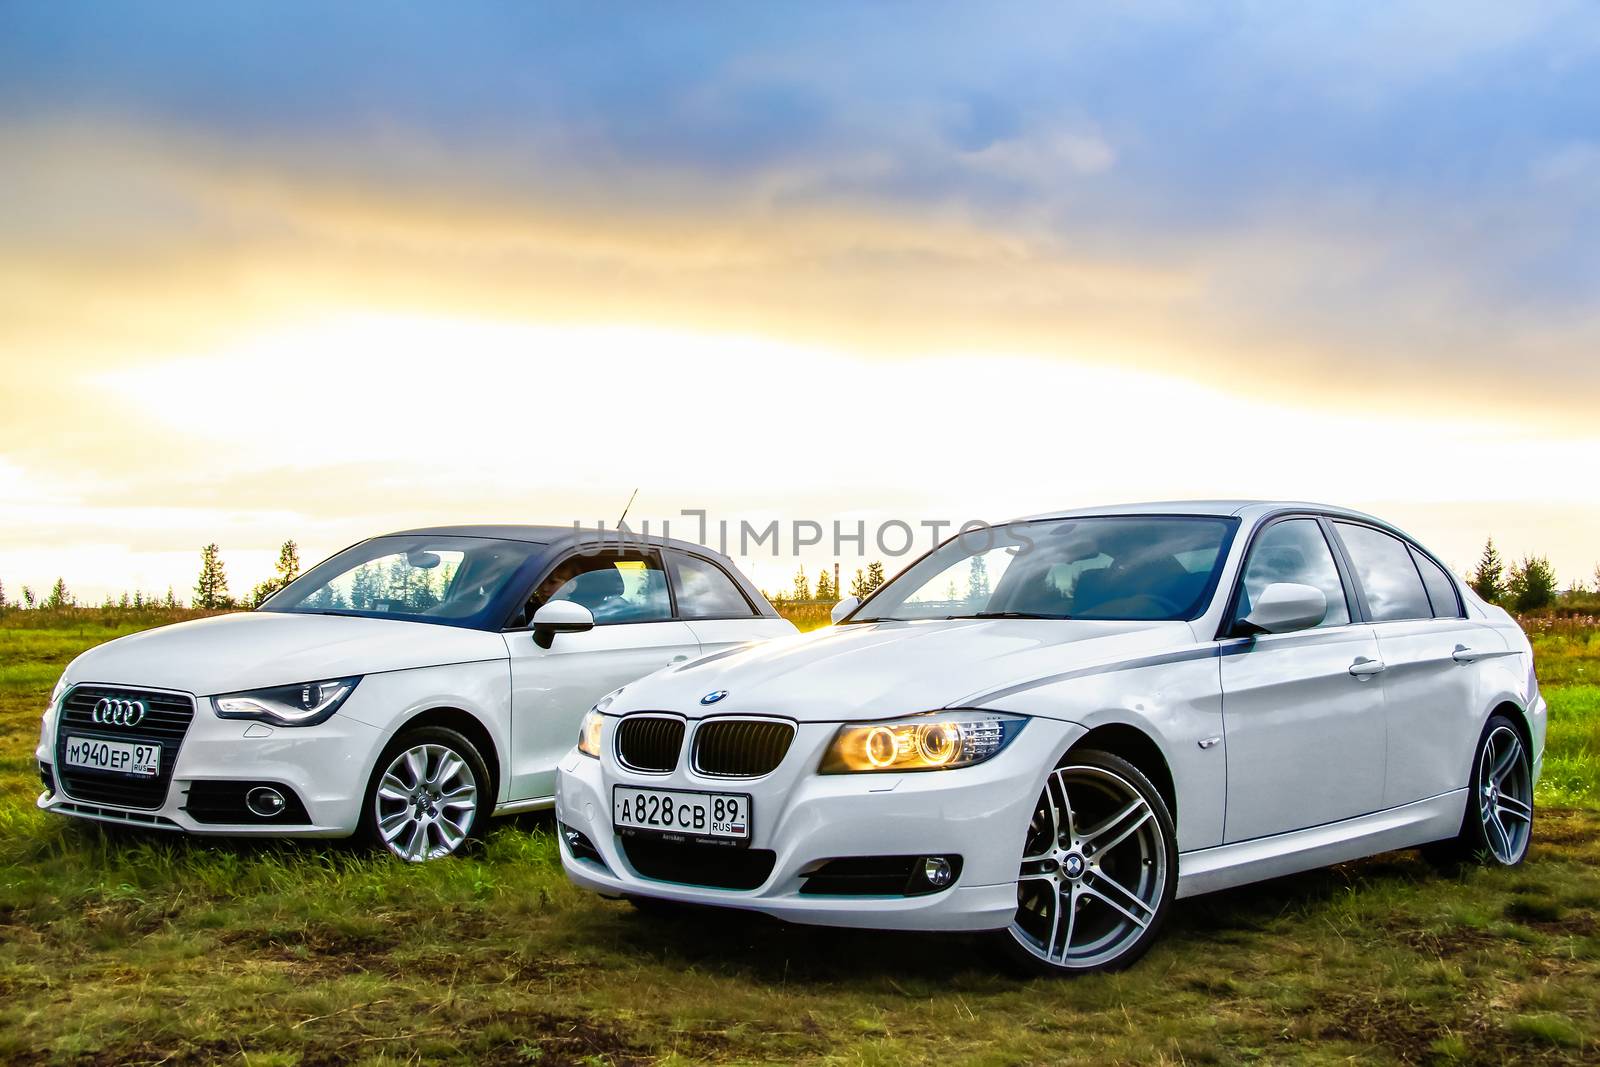 NOVYY URENGOY, RUSSIA - AUGUST 21, 2015: Motor cars Audi A1 and BMW E90 318i at the countryside.